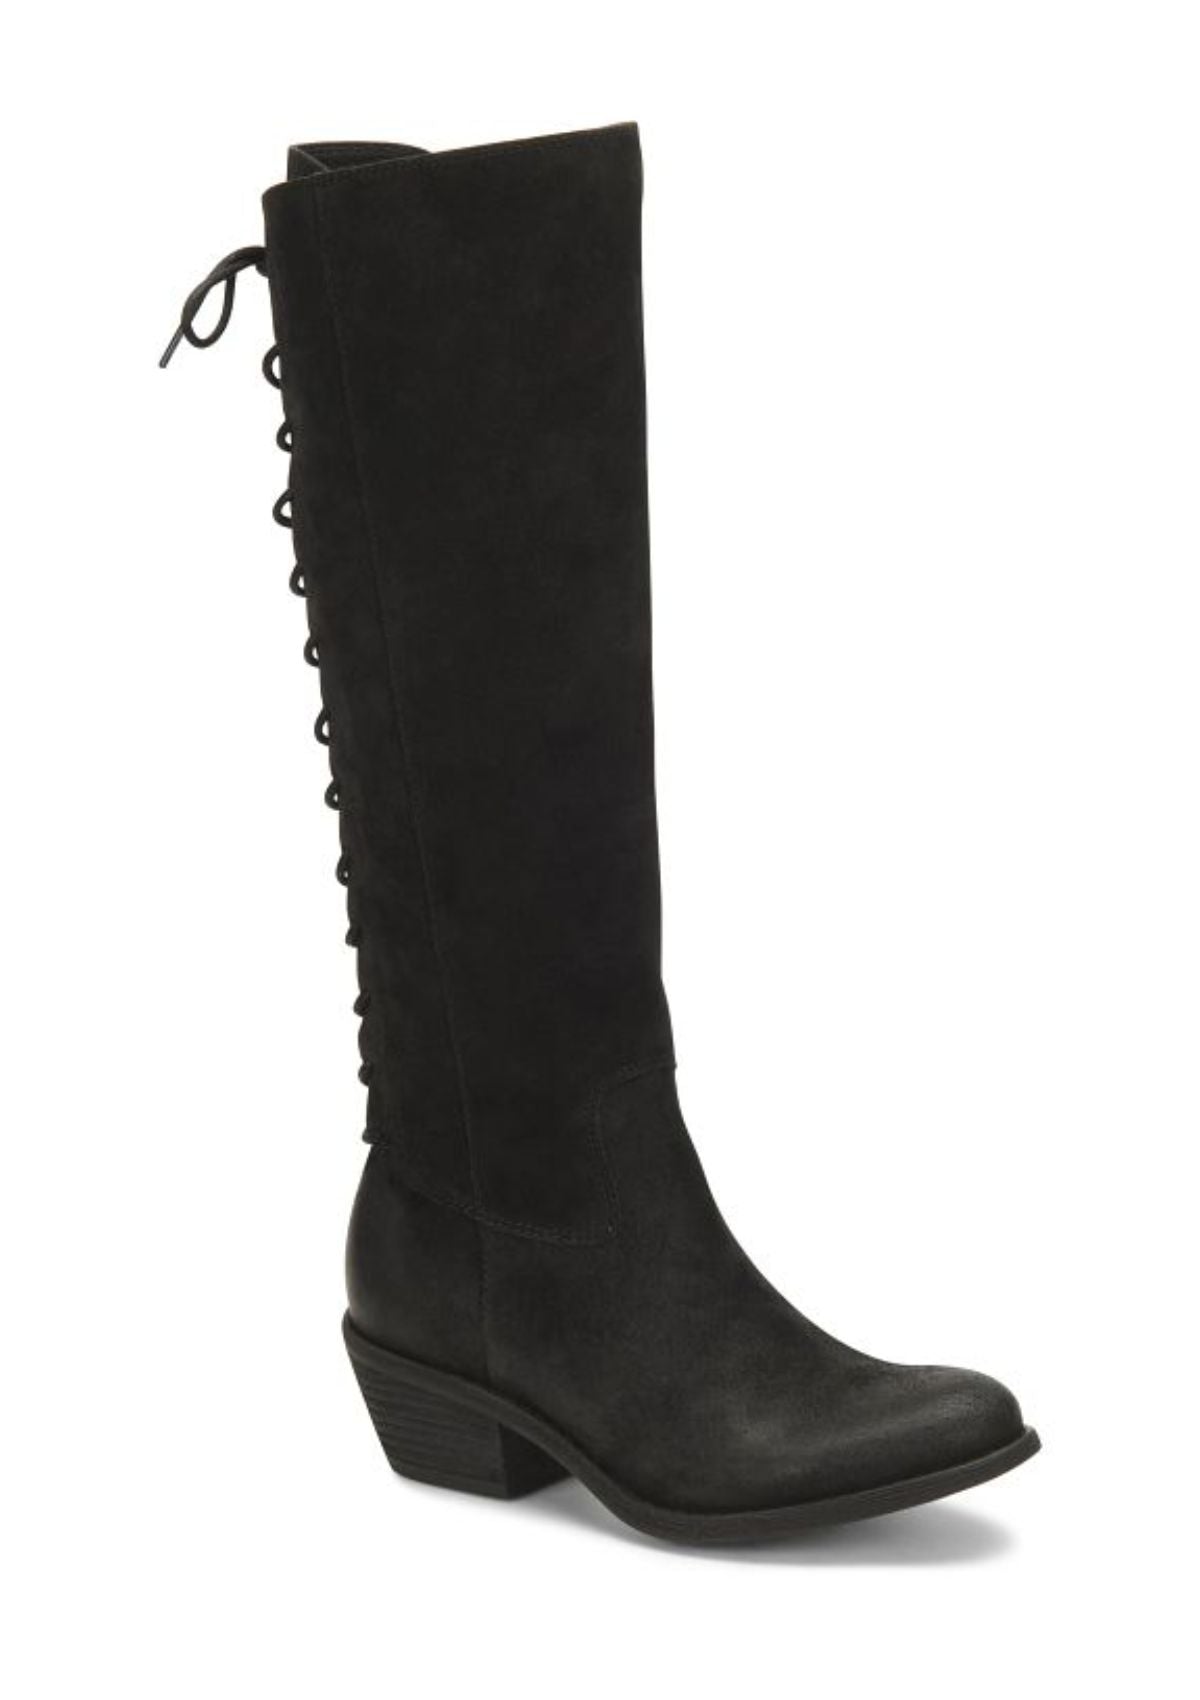 Sharnell Black Suede Tall Boot with Inside Zipper -Sofft Shoe Co- Ruby Jane-